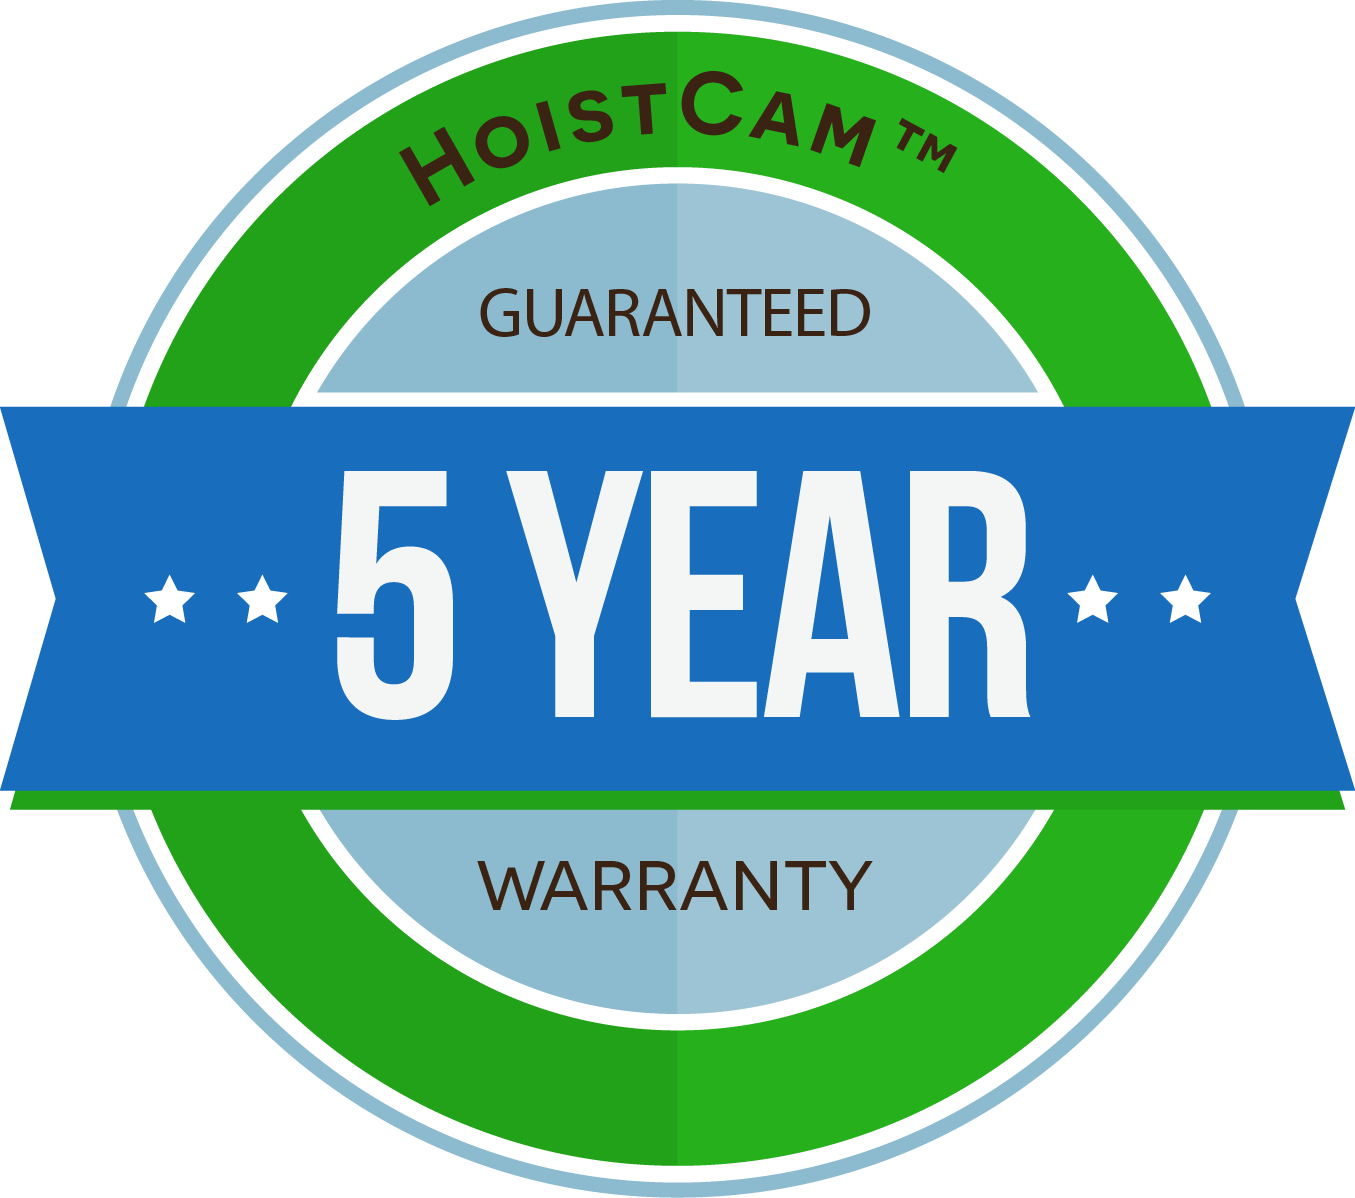 Netarus LLC, maker of the HoistCam platform of remote camera monitoring systems, now offers a five-year warranty on standard HoistCam camera systems.